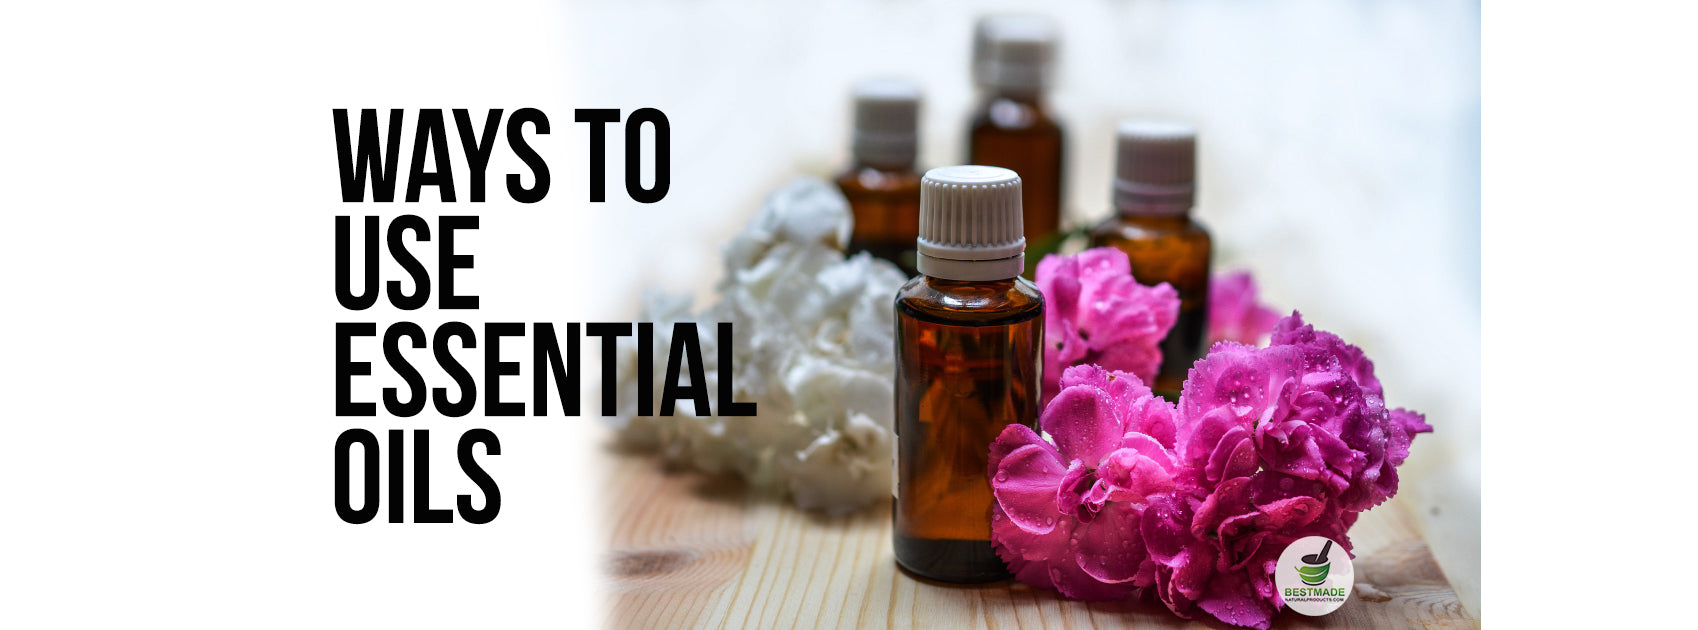 Ways to Use Essential Oils